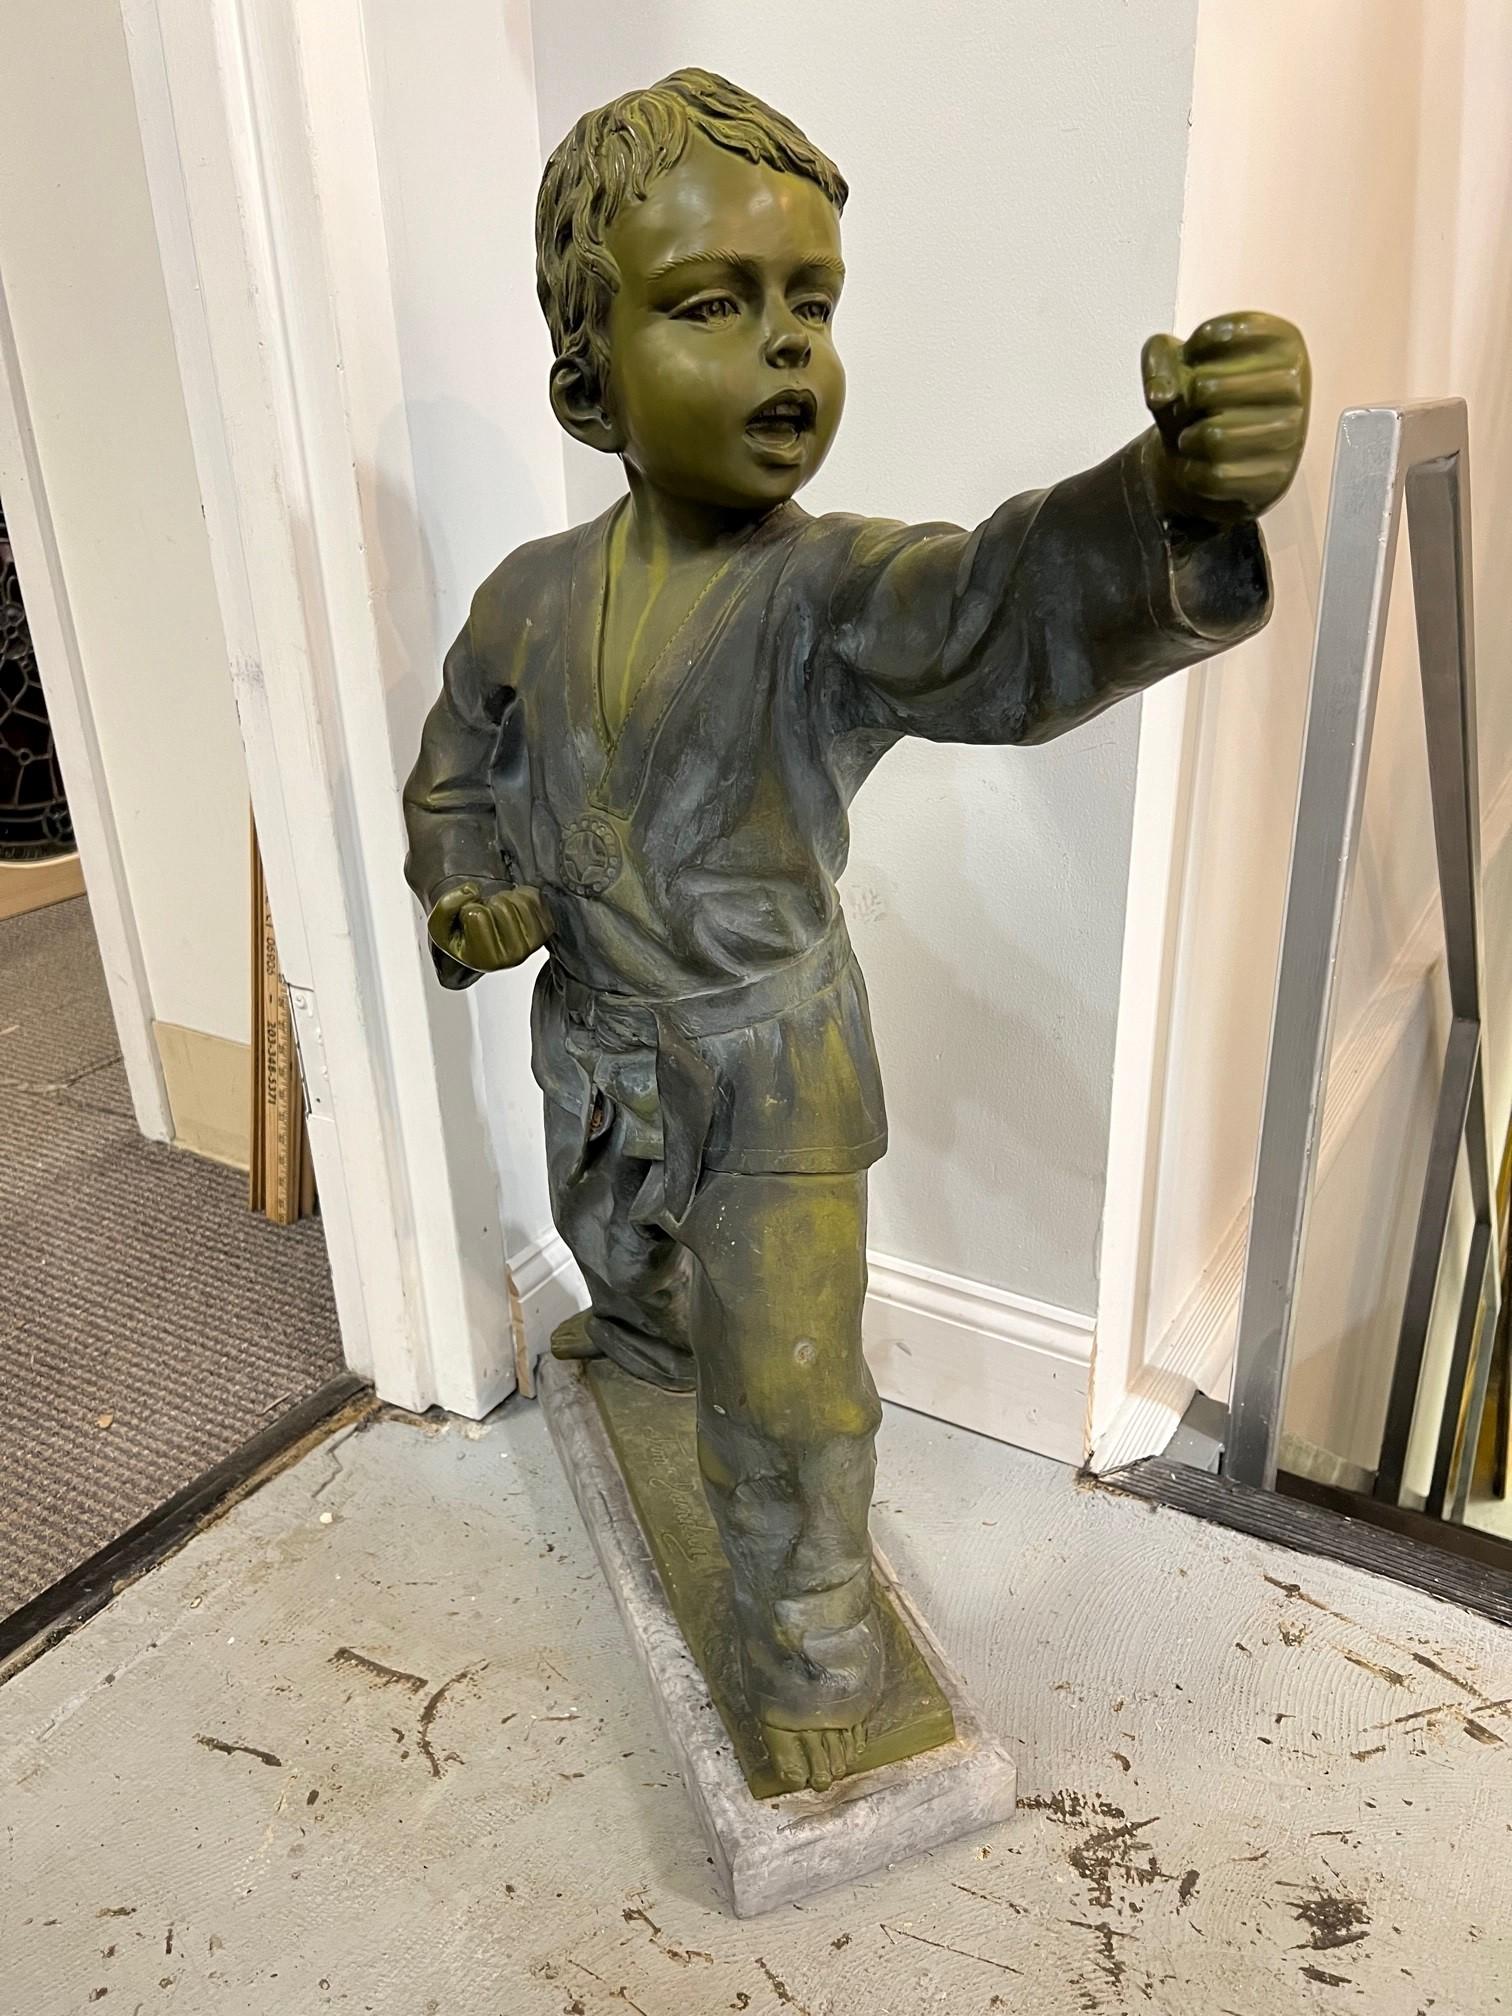 Late 20th century bronze martial arts boy or Karate Kid statue on a marble base. Its been outside for many years and is weathered but in good condition, only a small chip on the base. The bronze is signed Jim Davidson which I believe is a fictional